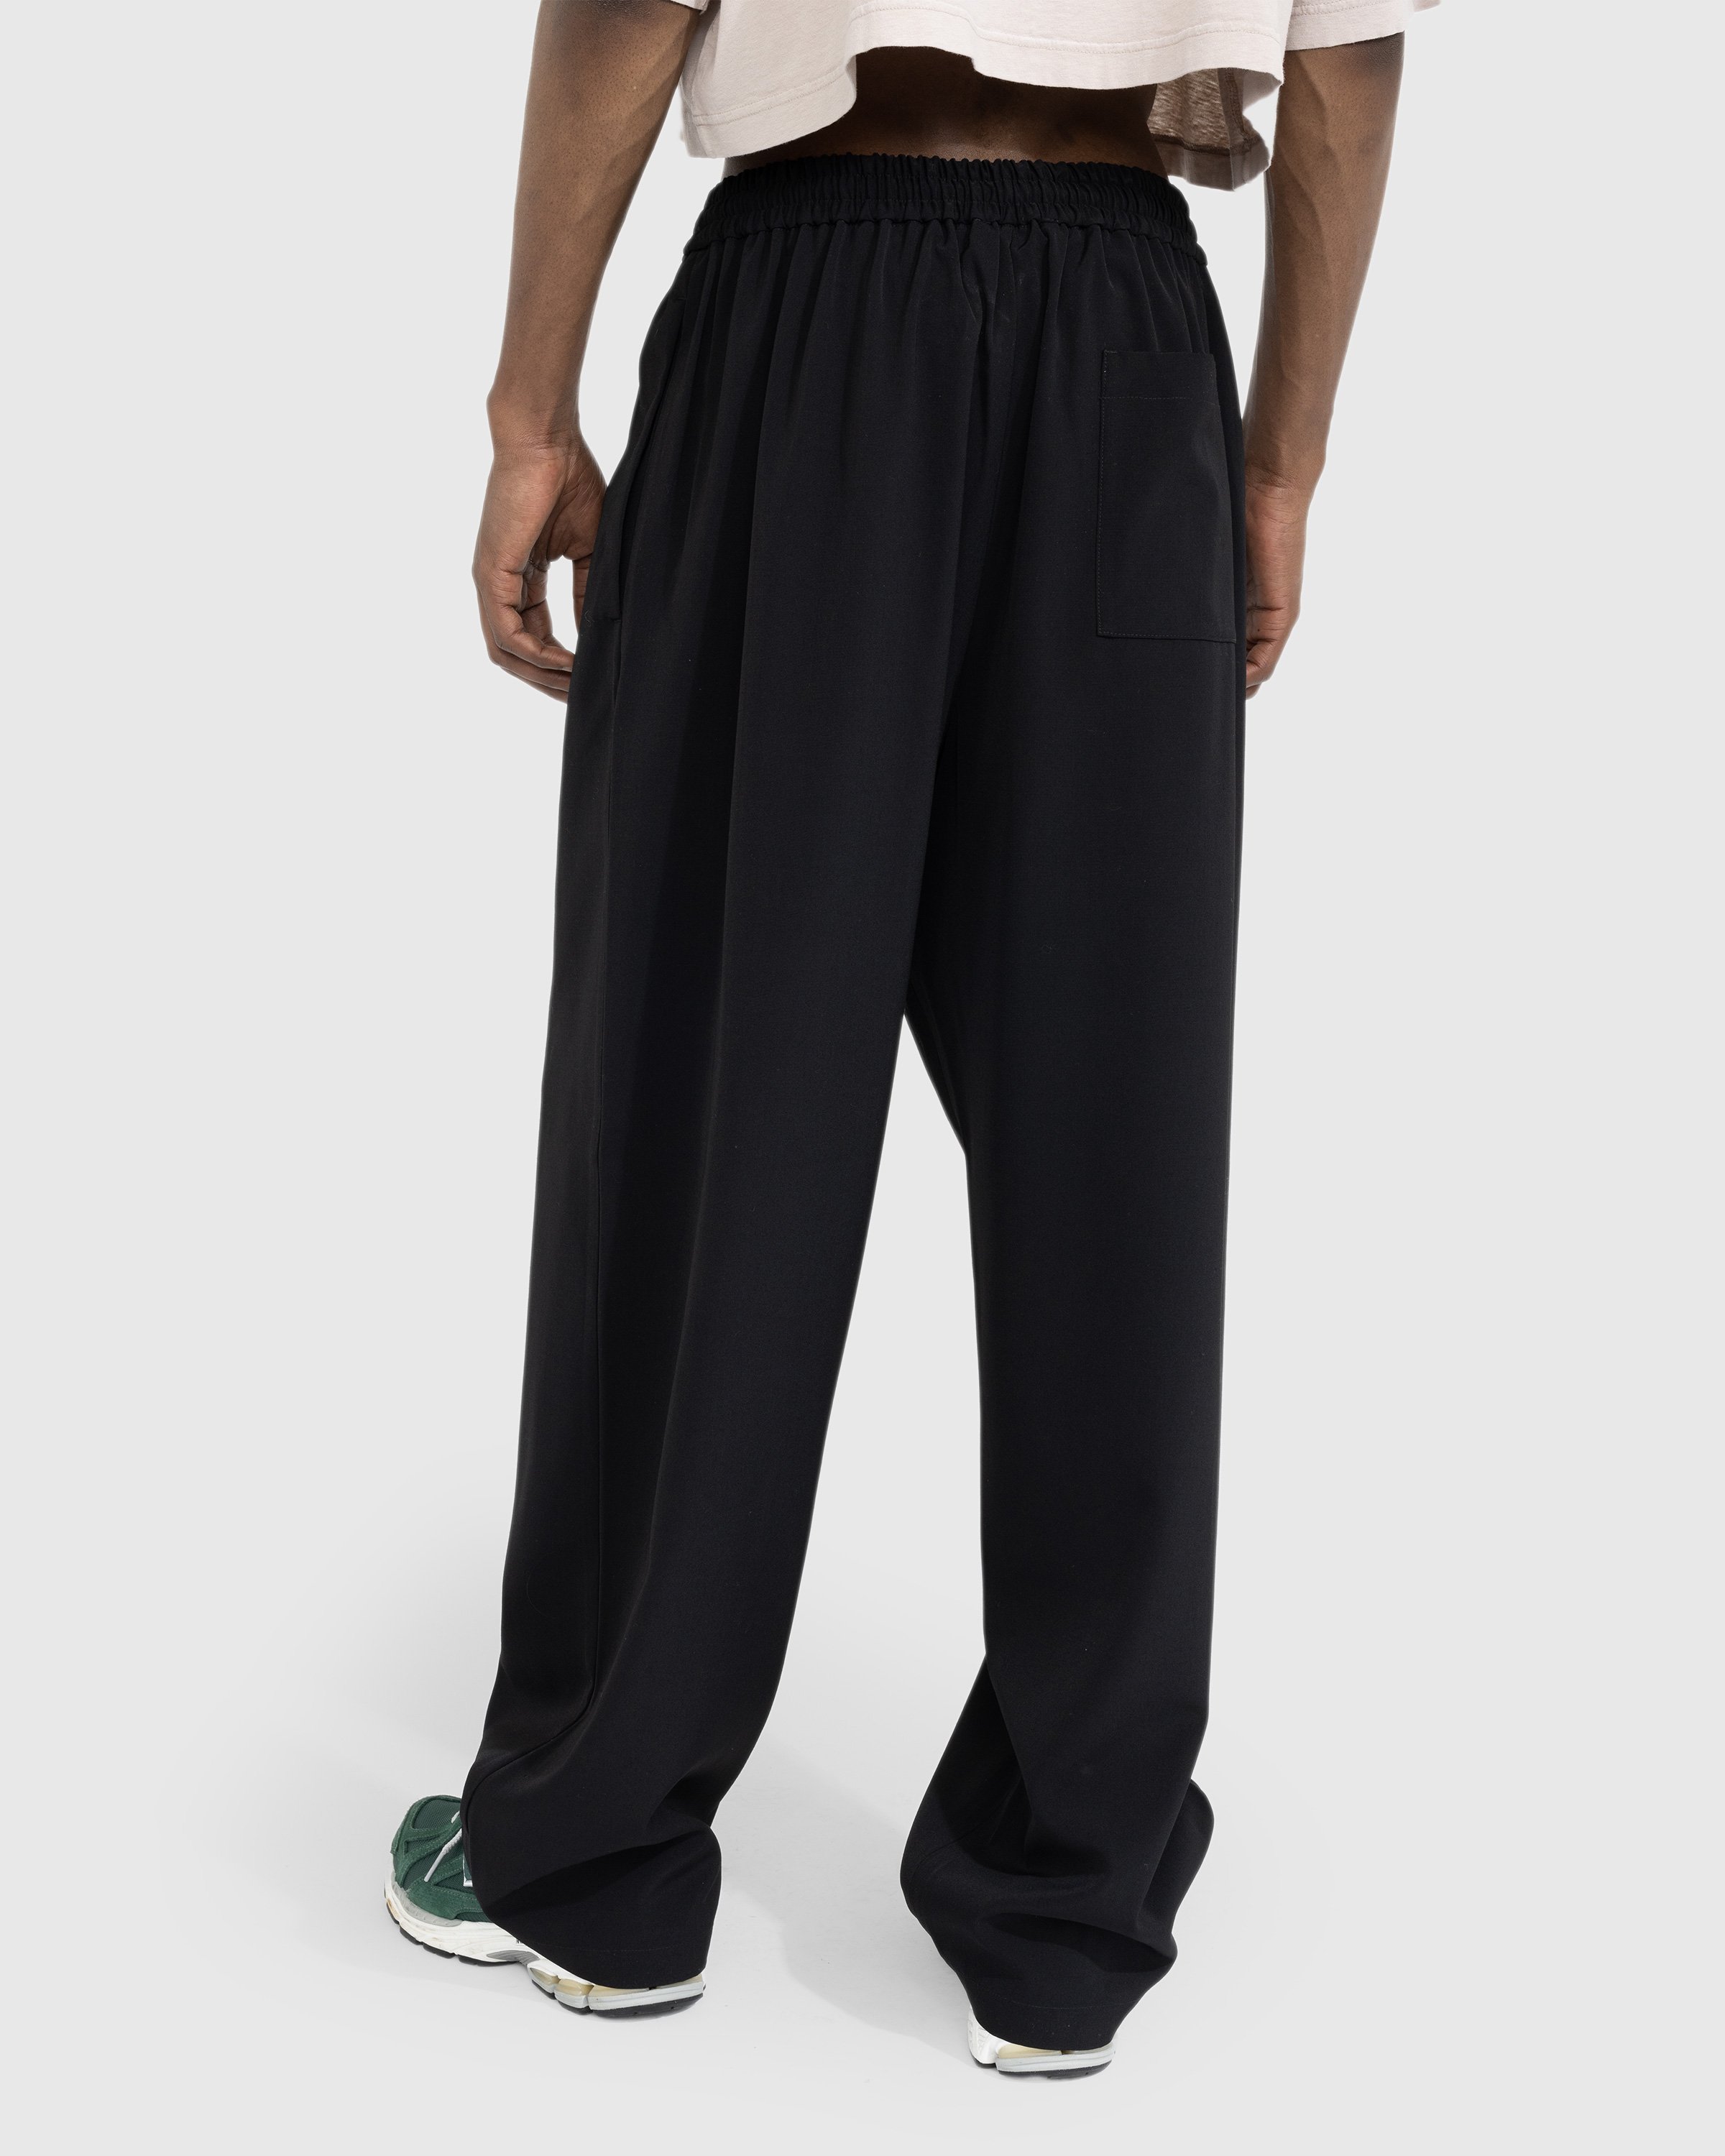 Acne Studios - Relaxed Fit Trousers Black - Clothing - Black - Image 3